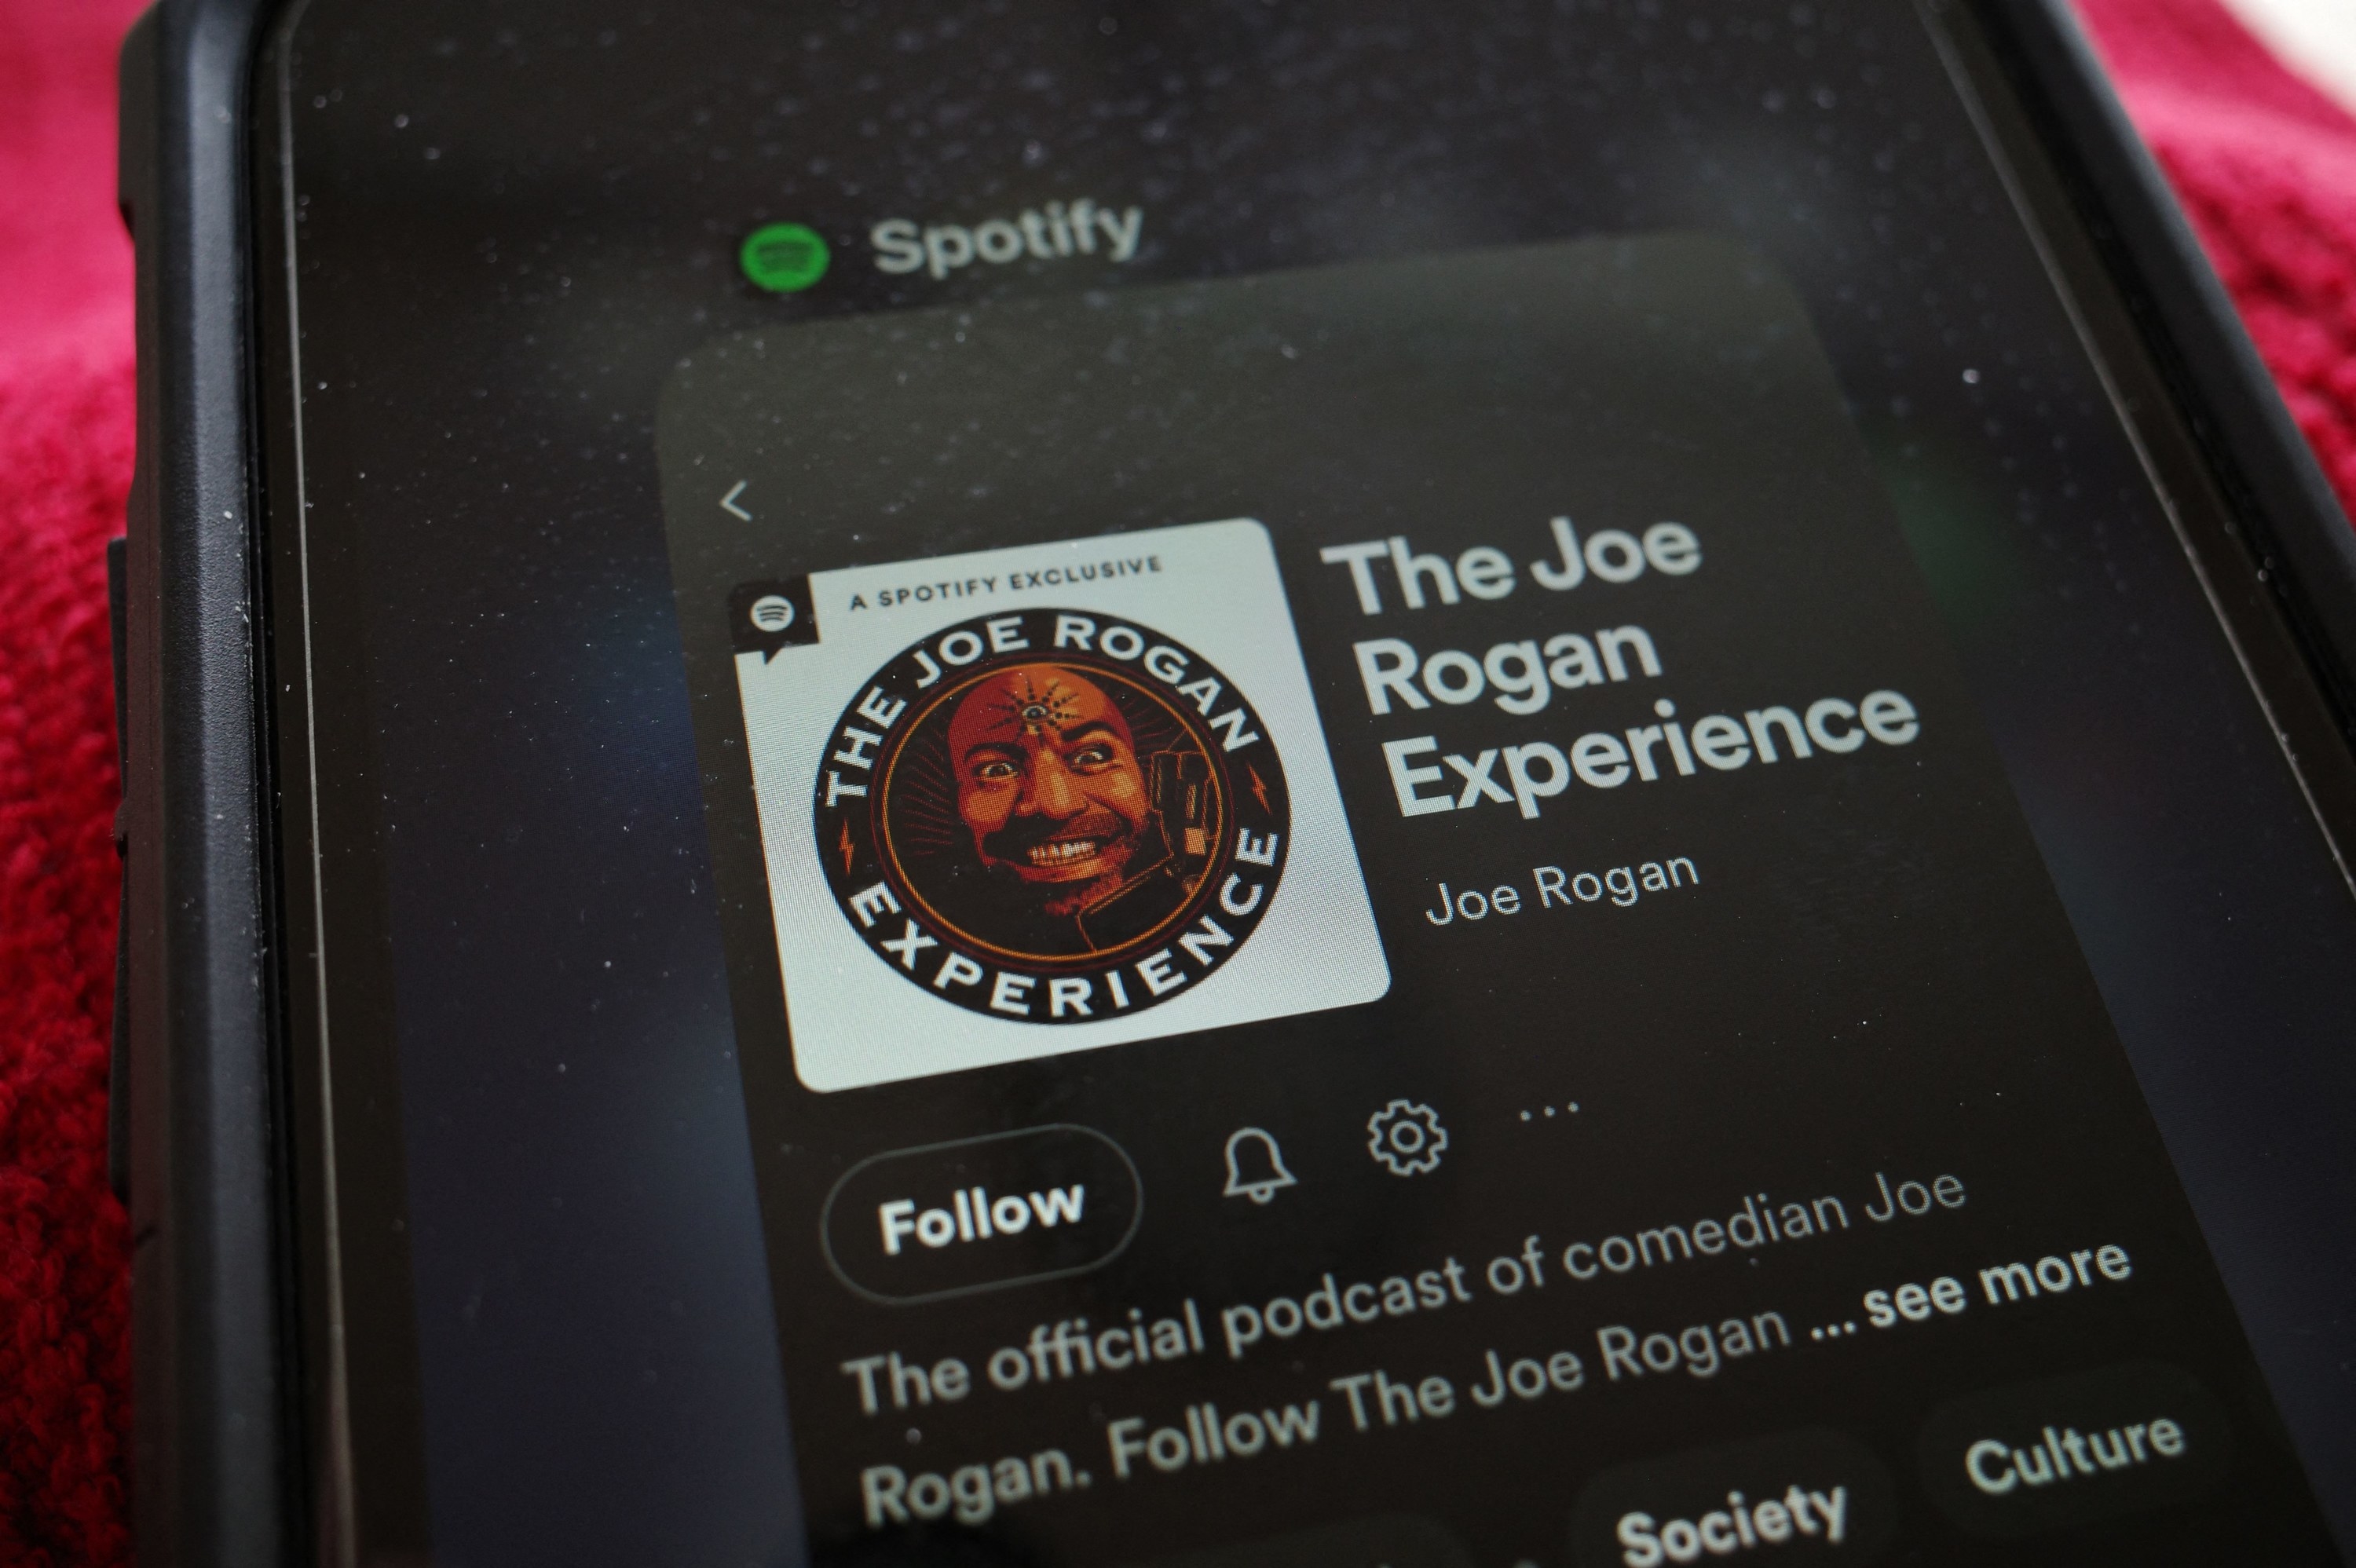 The Spotify page for The Joe Rogan Experience podcast